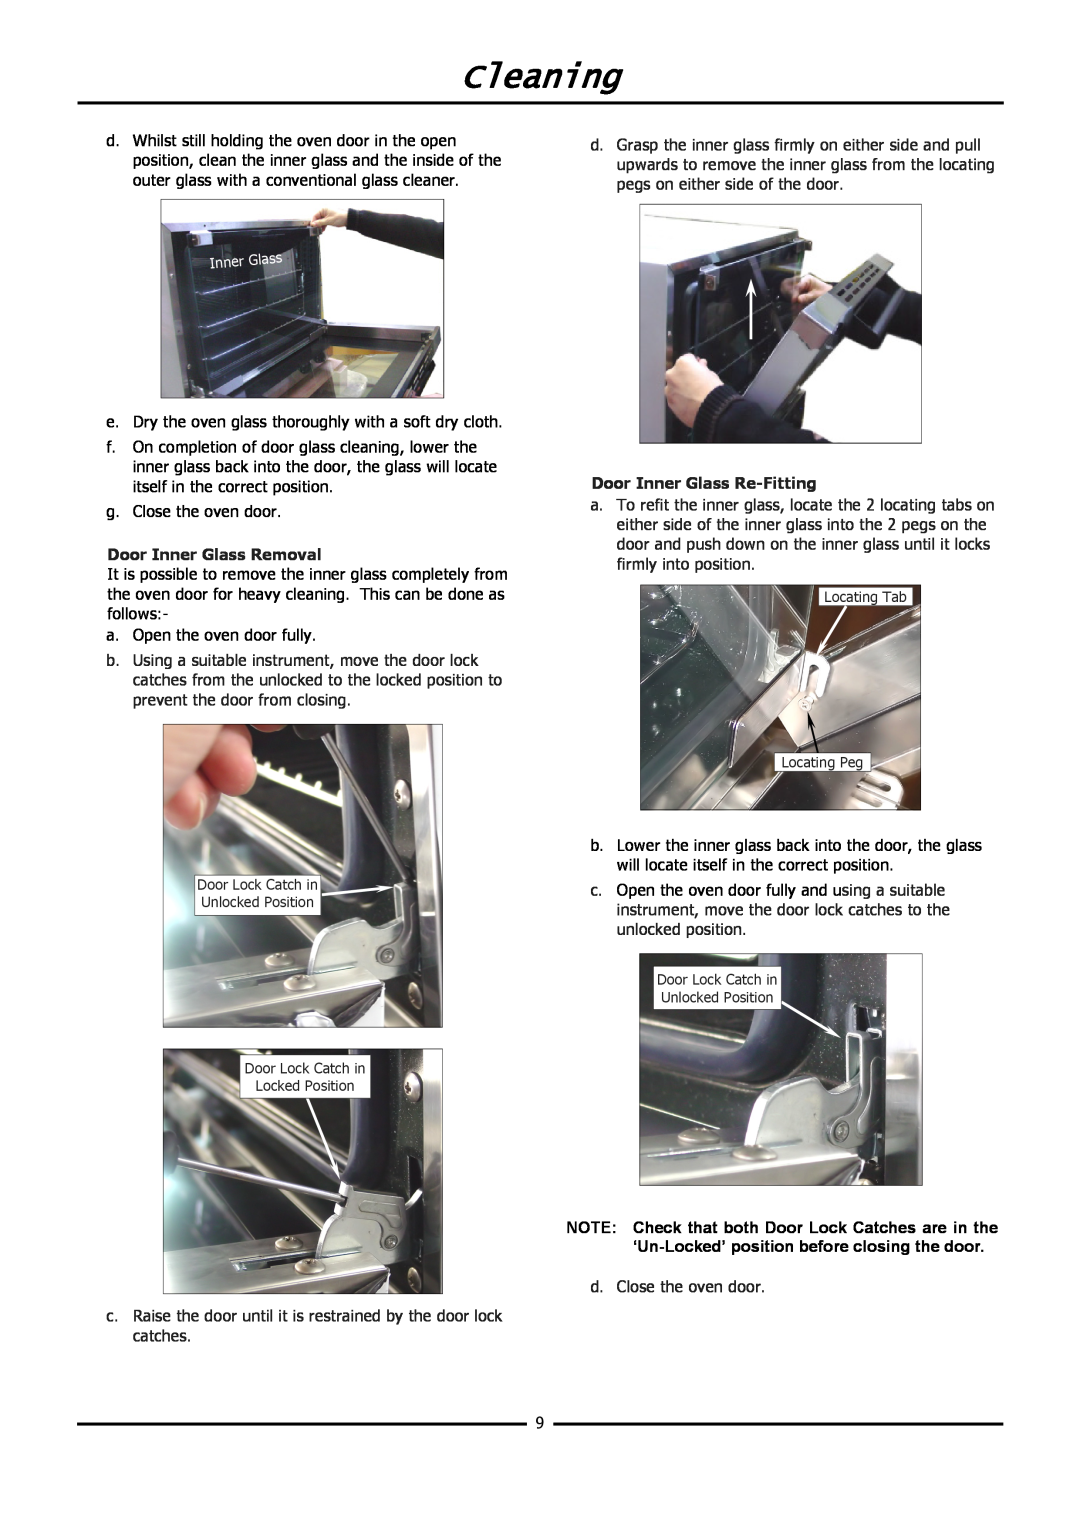 Moffat E20M operation manual Cleaning, Door Inner Glass Removal, Door Inner Glass Re-Fitting 